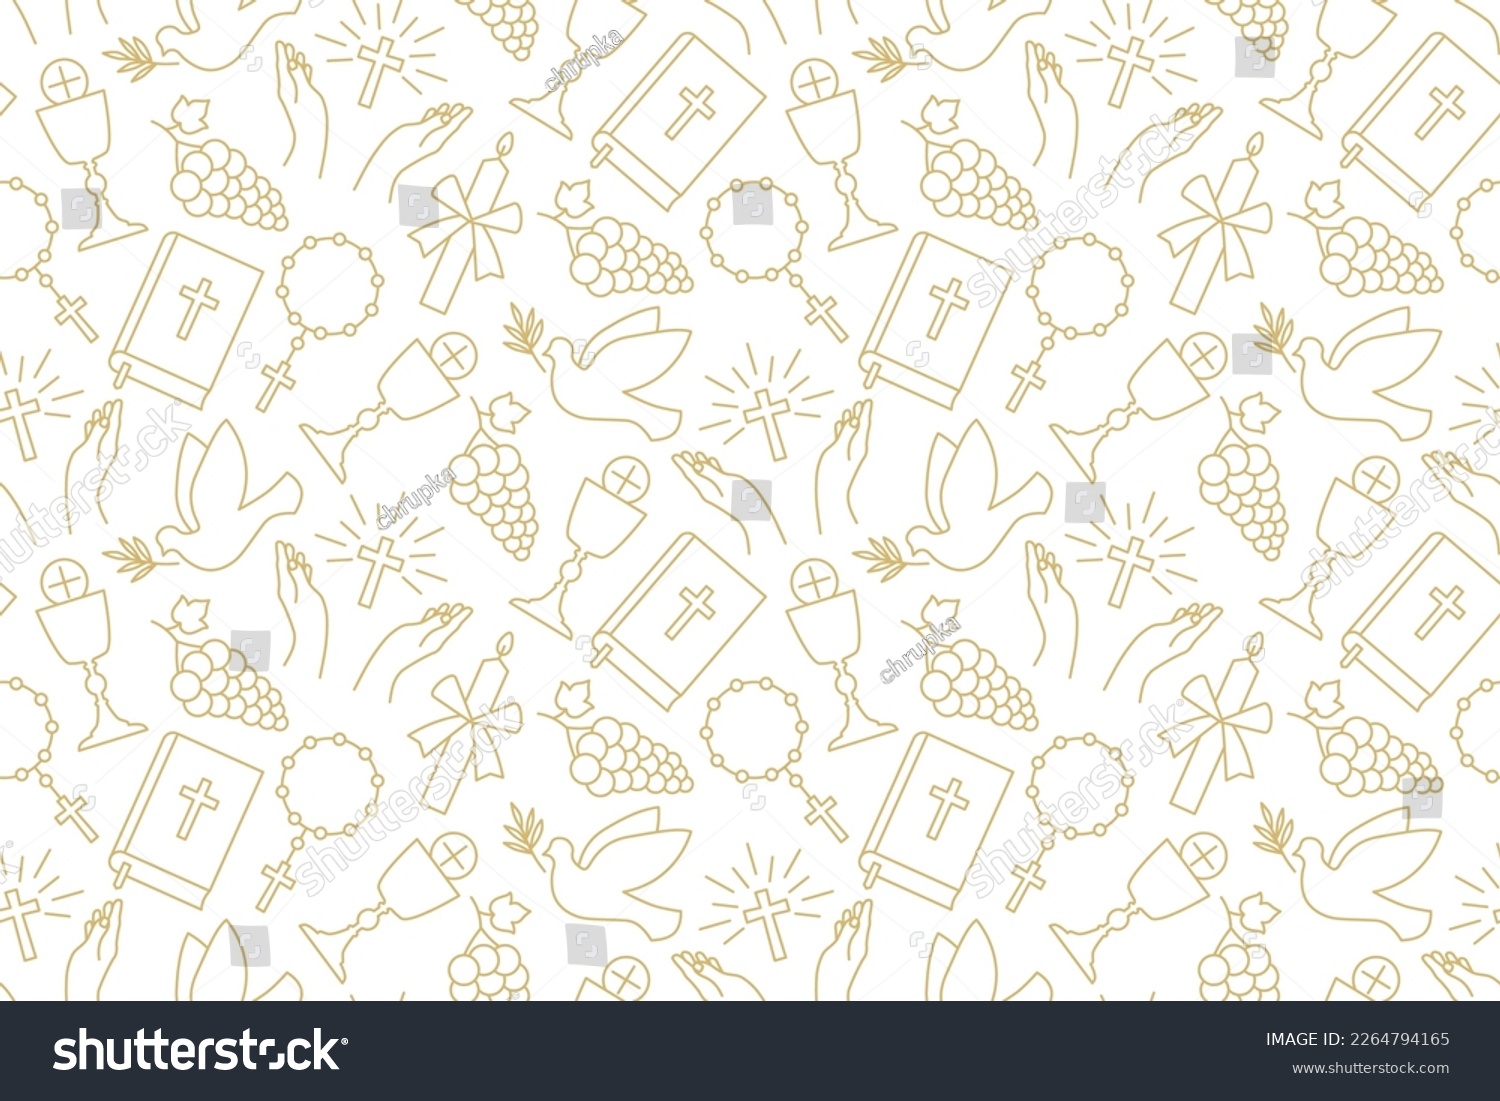 SVG of seamless pattern with christian religion icons: holy communion, chalice, grapes, praying hands, candle, dove with olive twig, rosary and bible - vector illustration svg